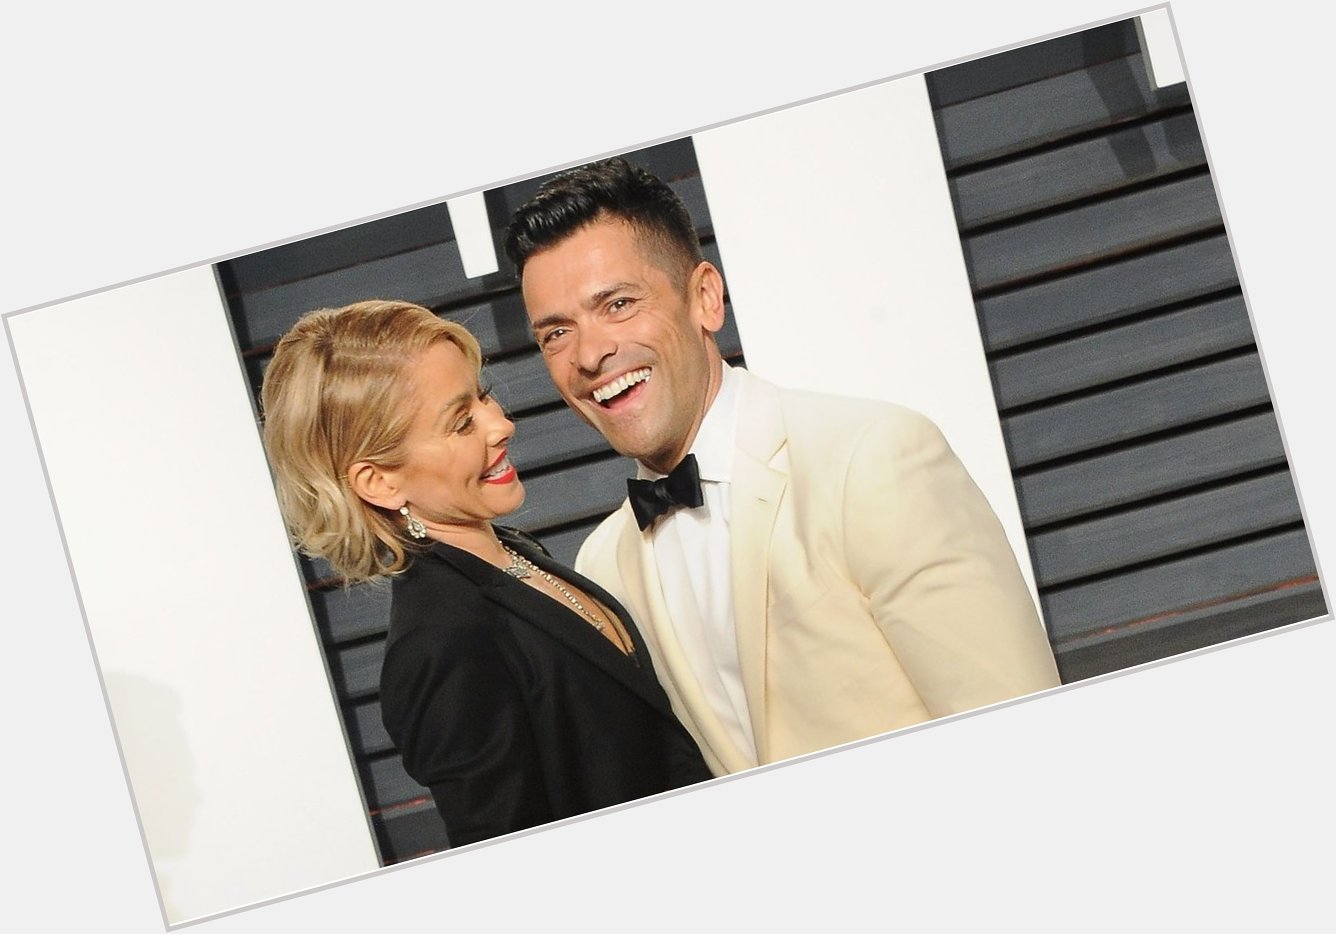 Kelly Ripa Sent a Naughty Birthday Wish to Mark Consuelos, and Now We Need a Cold Shower  